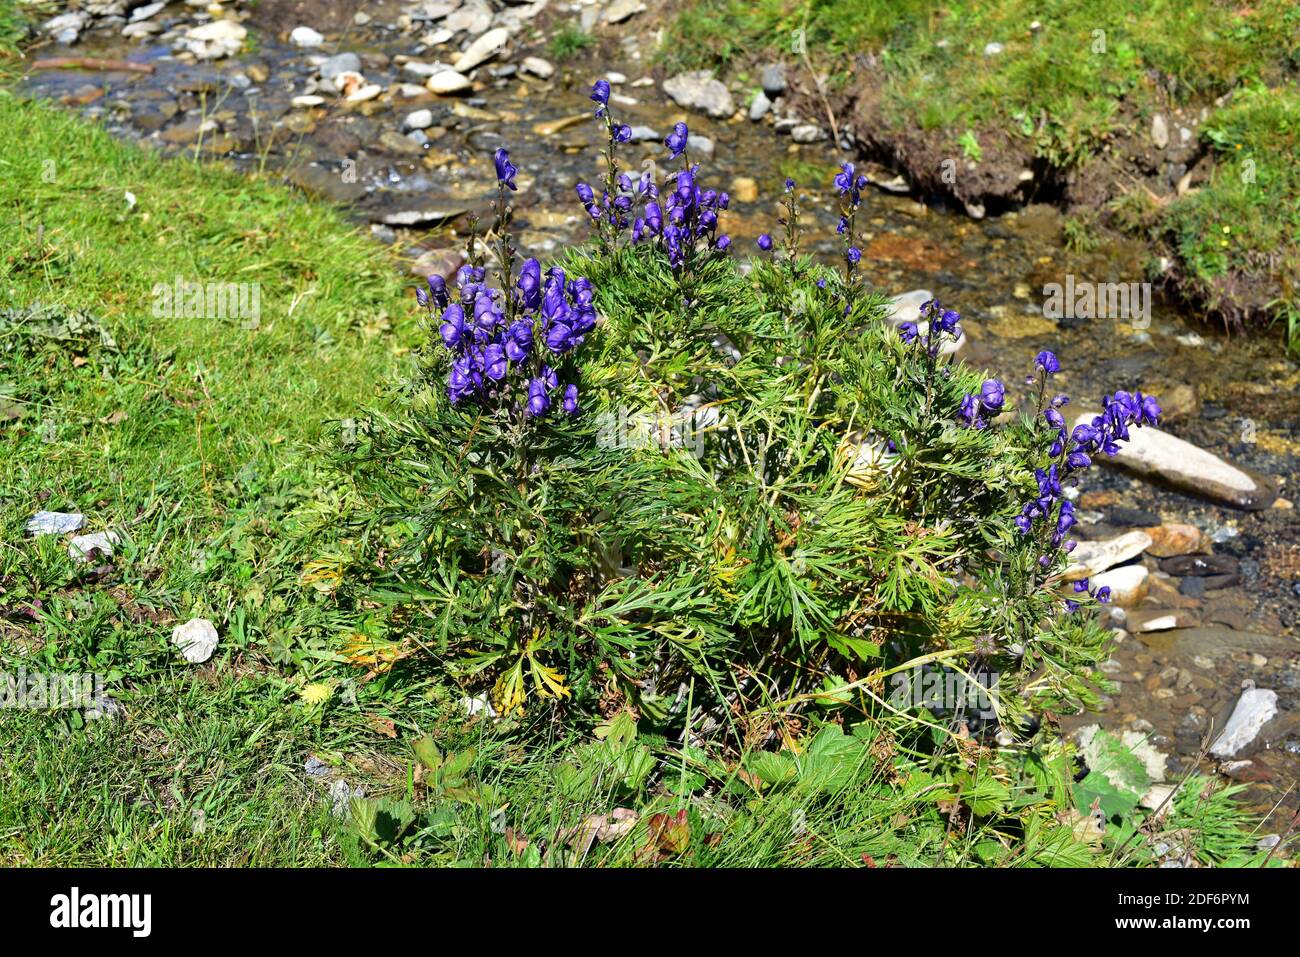 Aconite or monk's hood (Aconitum napellus) is a poisonous perennial herb endemic to western Europe. This photo was taken in Montgarri, Lleida Stock Photo